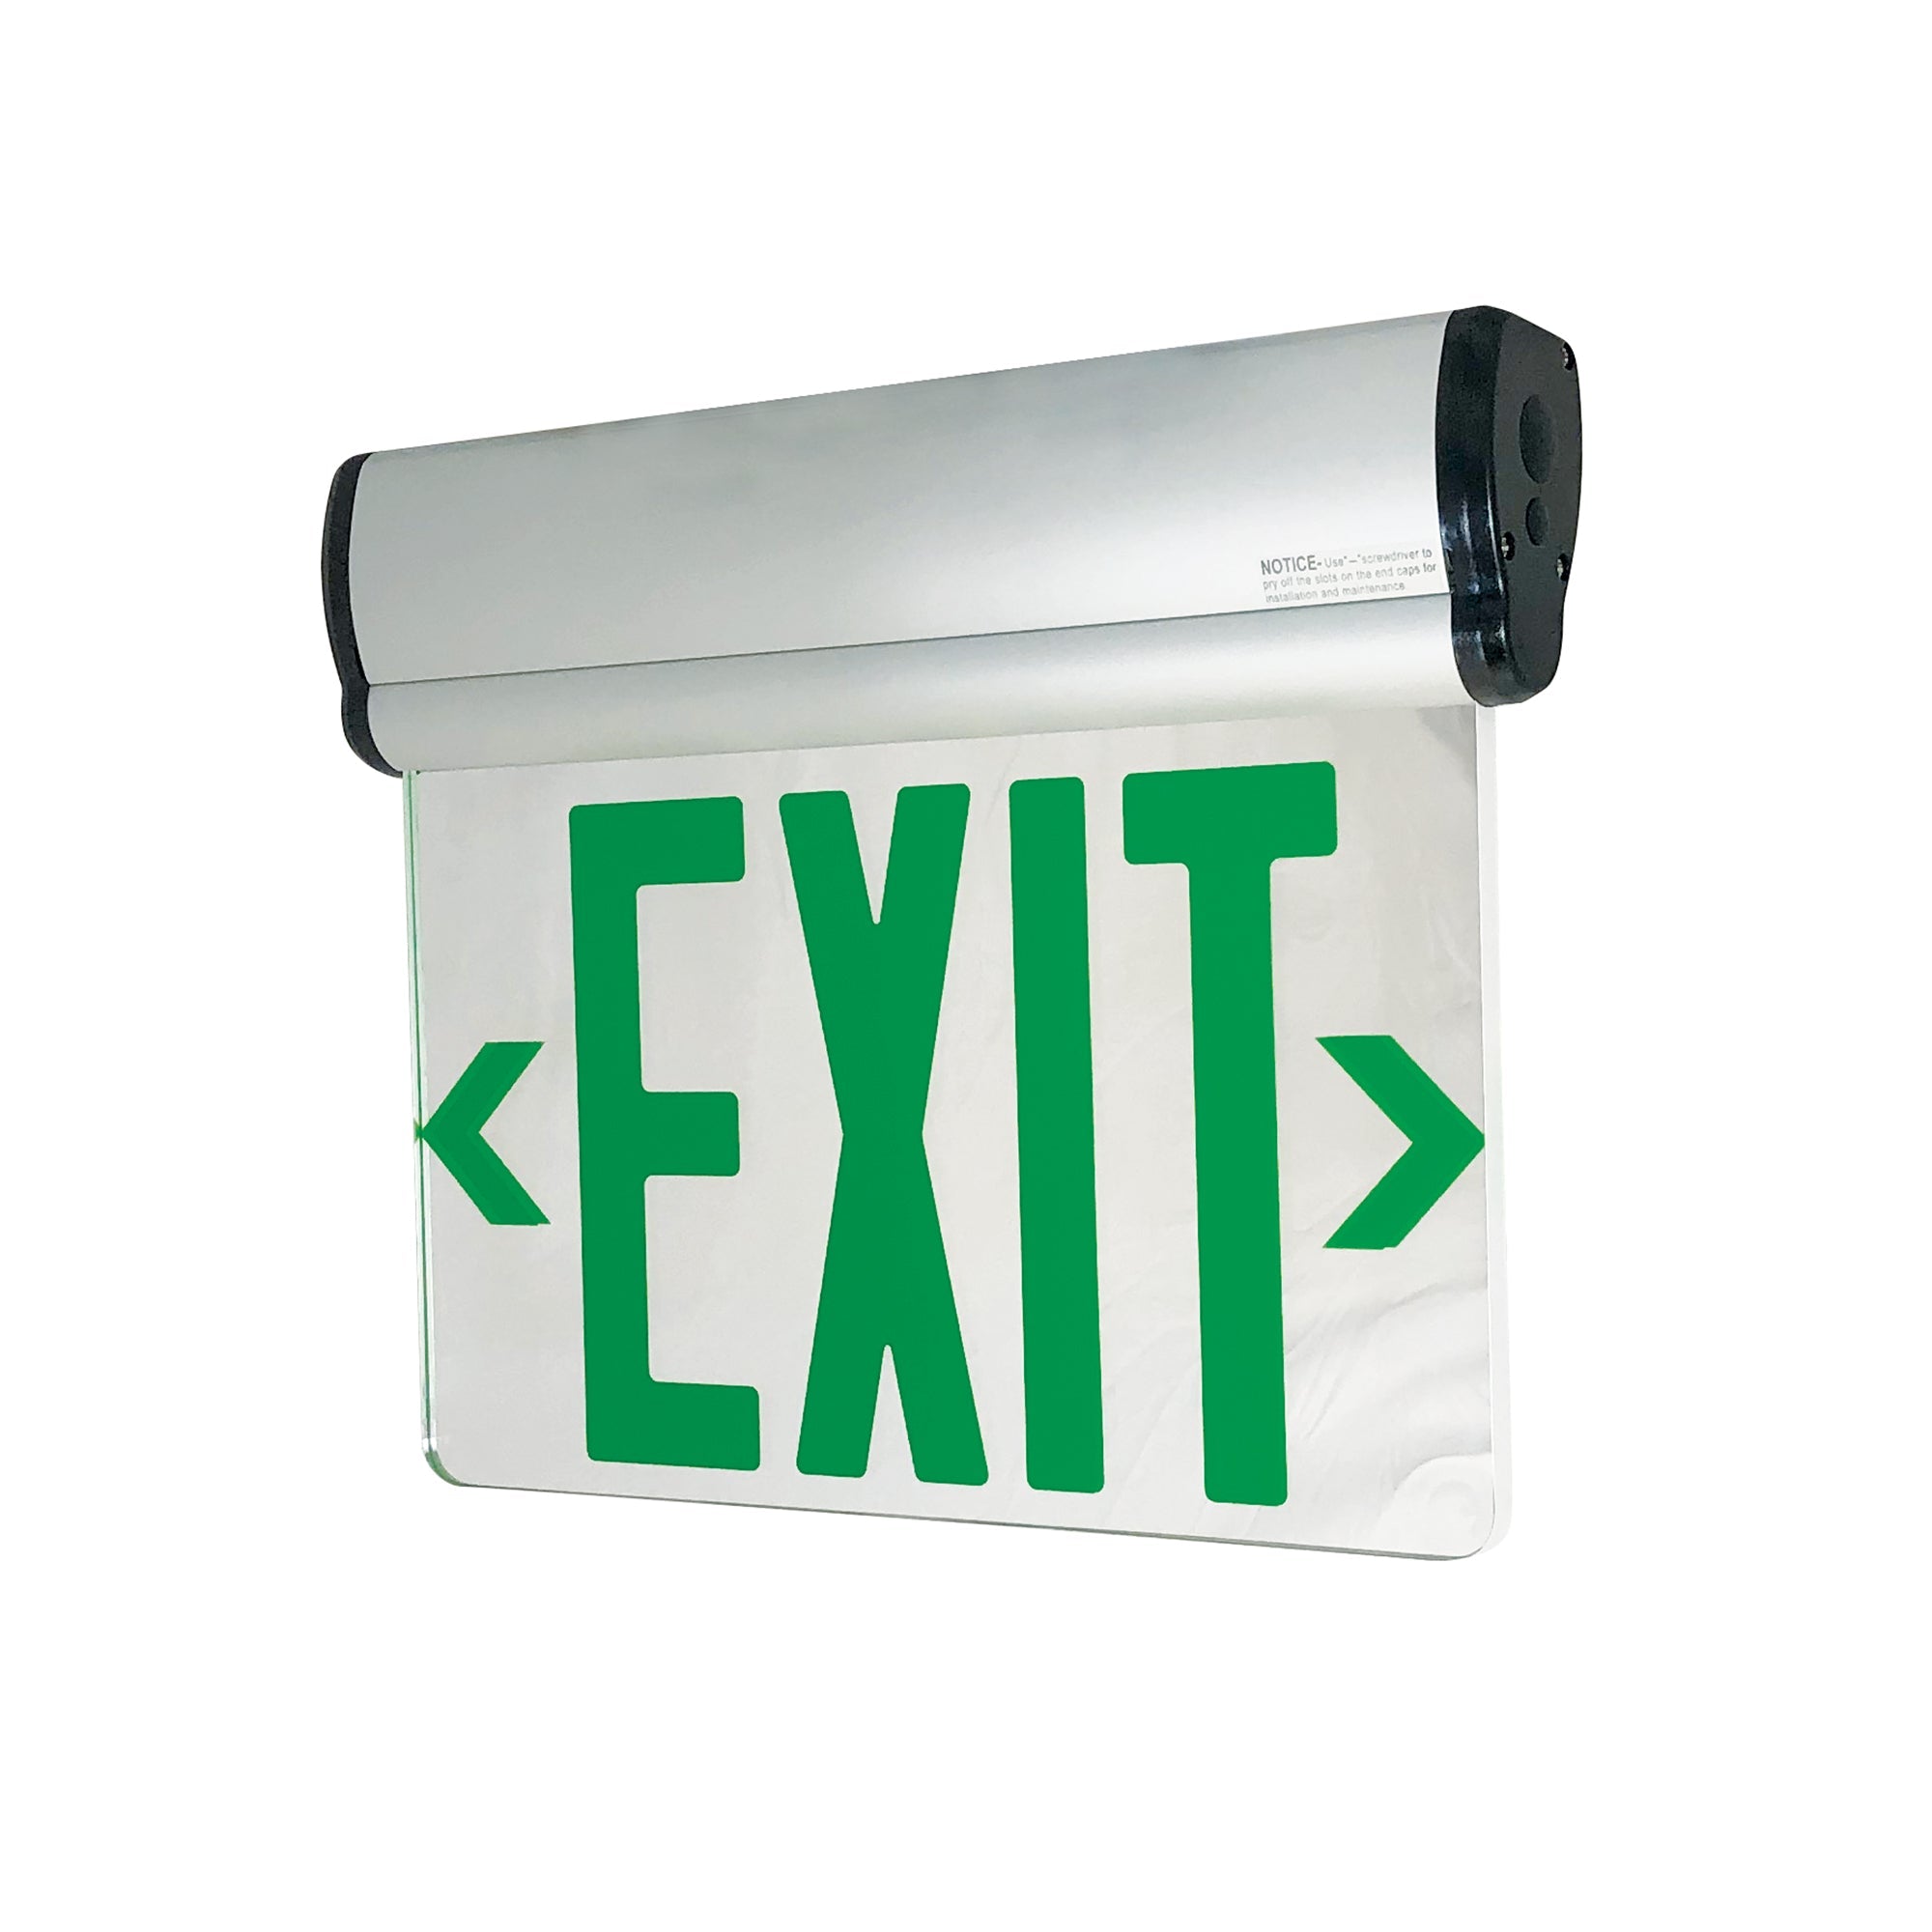 Nora Lighting NX-813-LEDG2MA - Exit / Emergency - Recessed Adjustable LED Edge-Lit Exit Sign, AC Only, 6 Inch Green Letters, Double Face / Mirrored Acrylic, Aluminum Housing